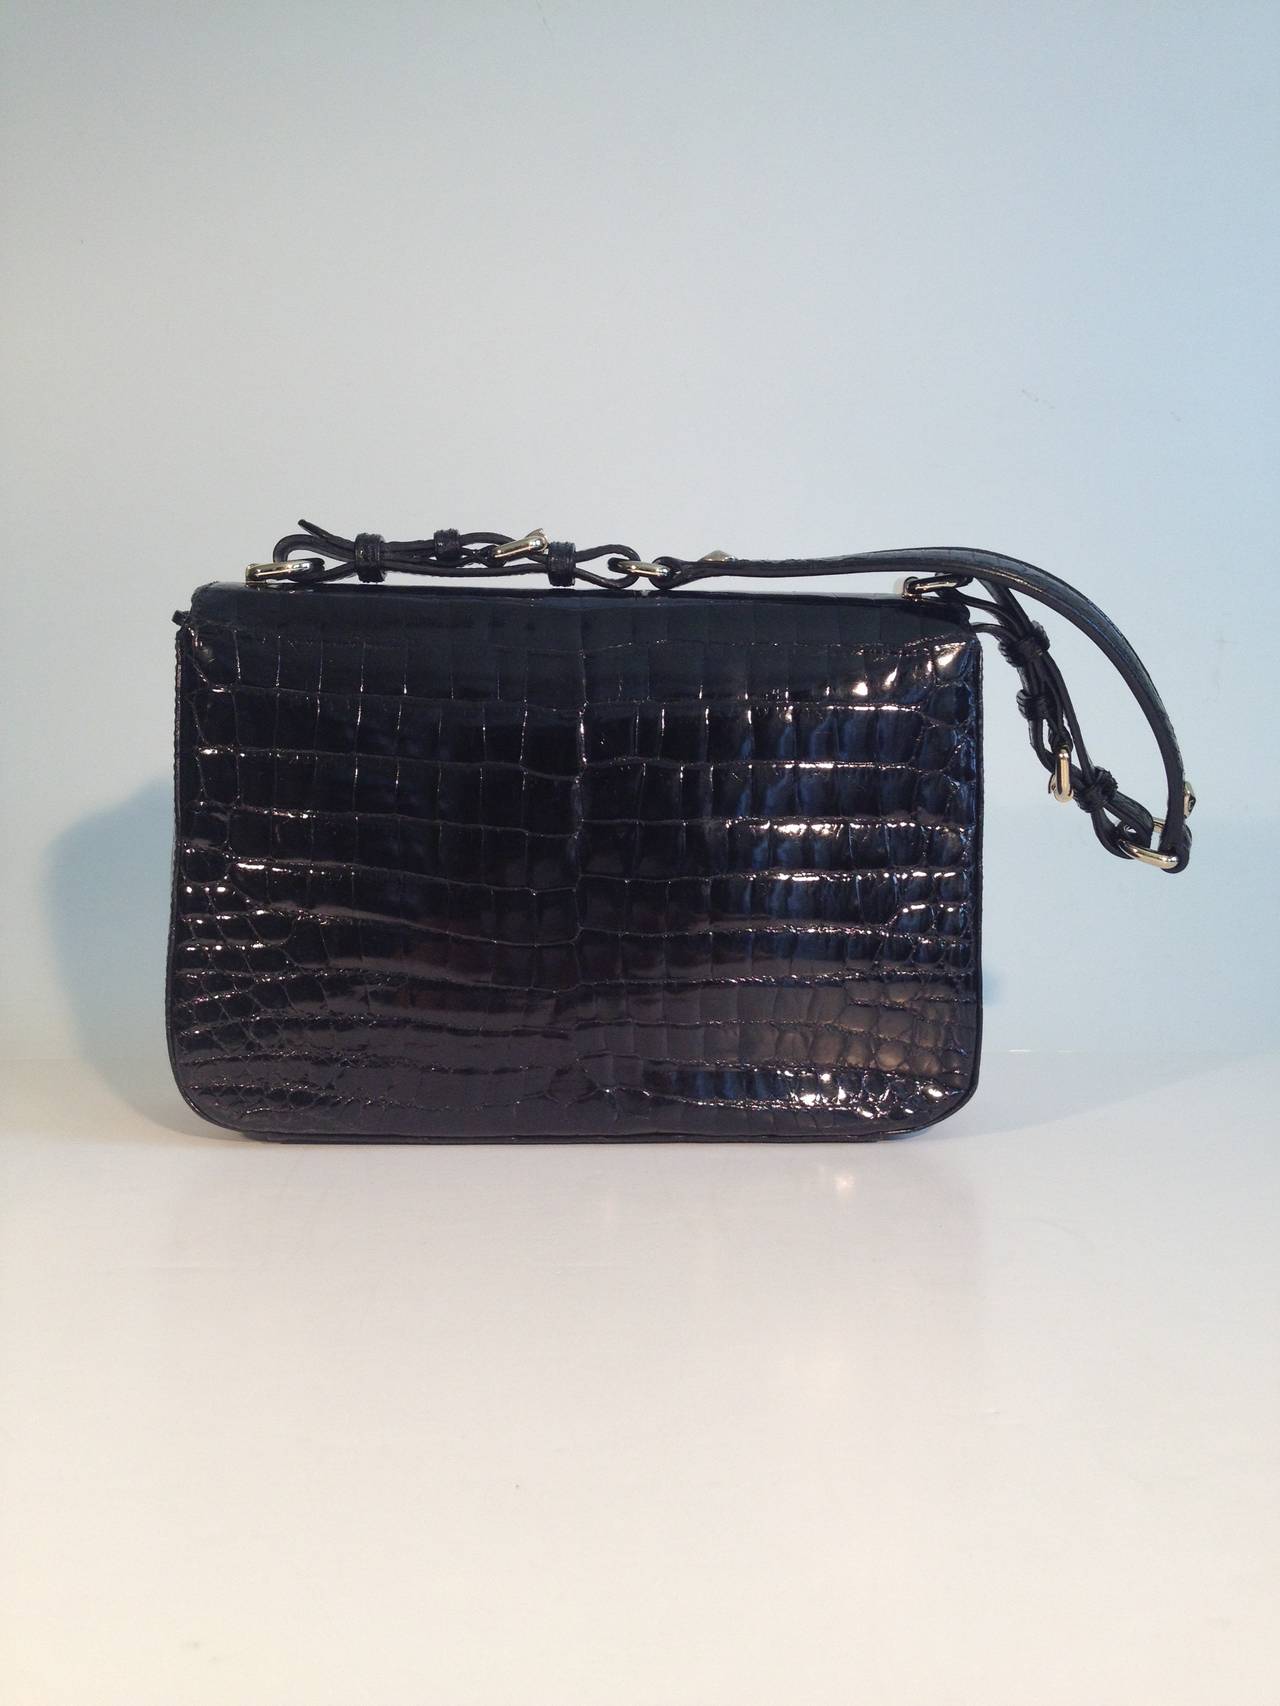 Super high shine black crocodile will never go out of style. By Christian Dior, this piece is the epitome of timeless luxury, while at the same time remaining modern and ultra stylish - the top of the bag features a double flap closure, with